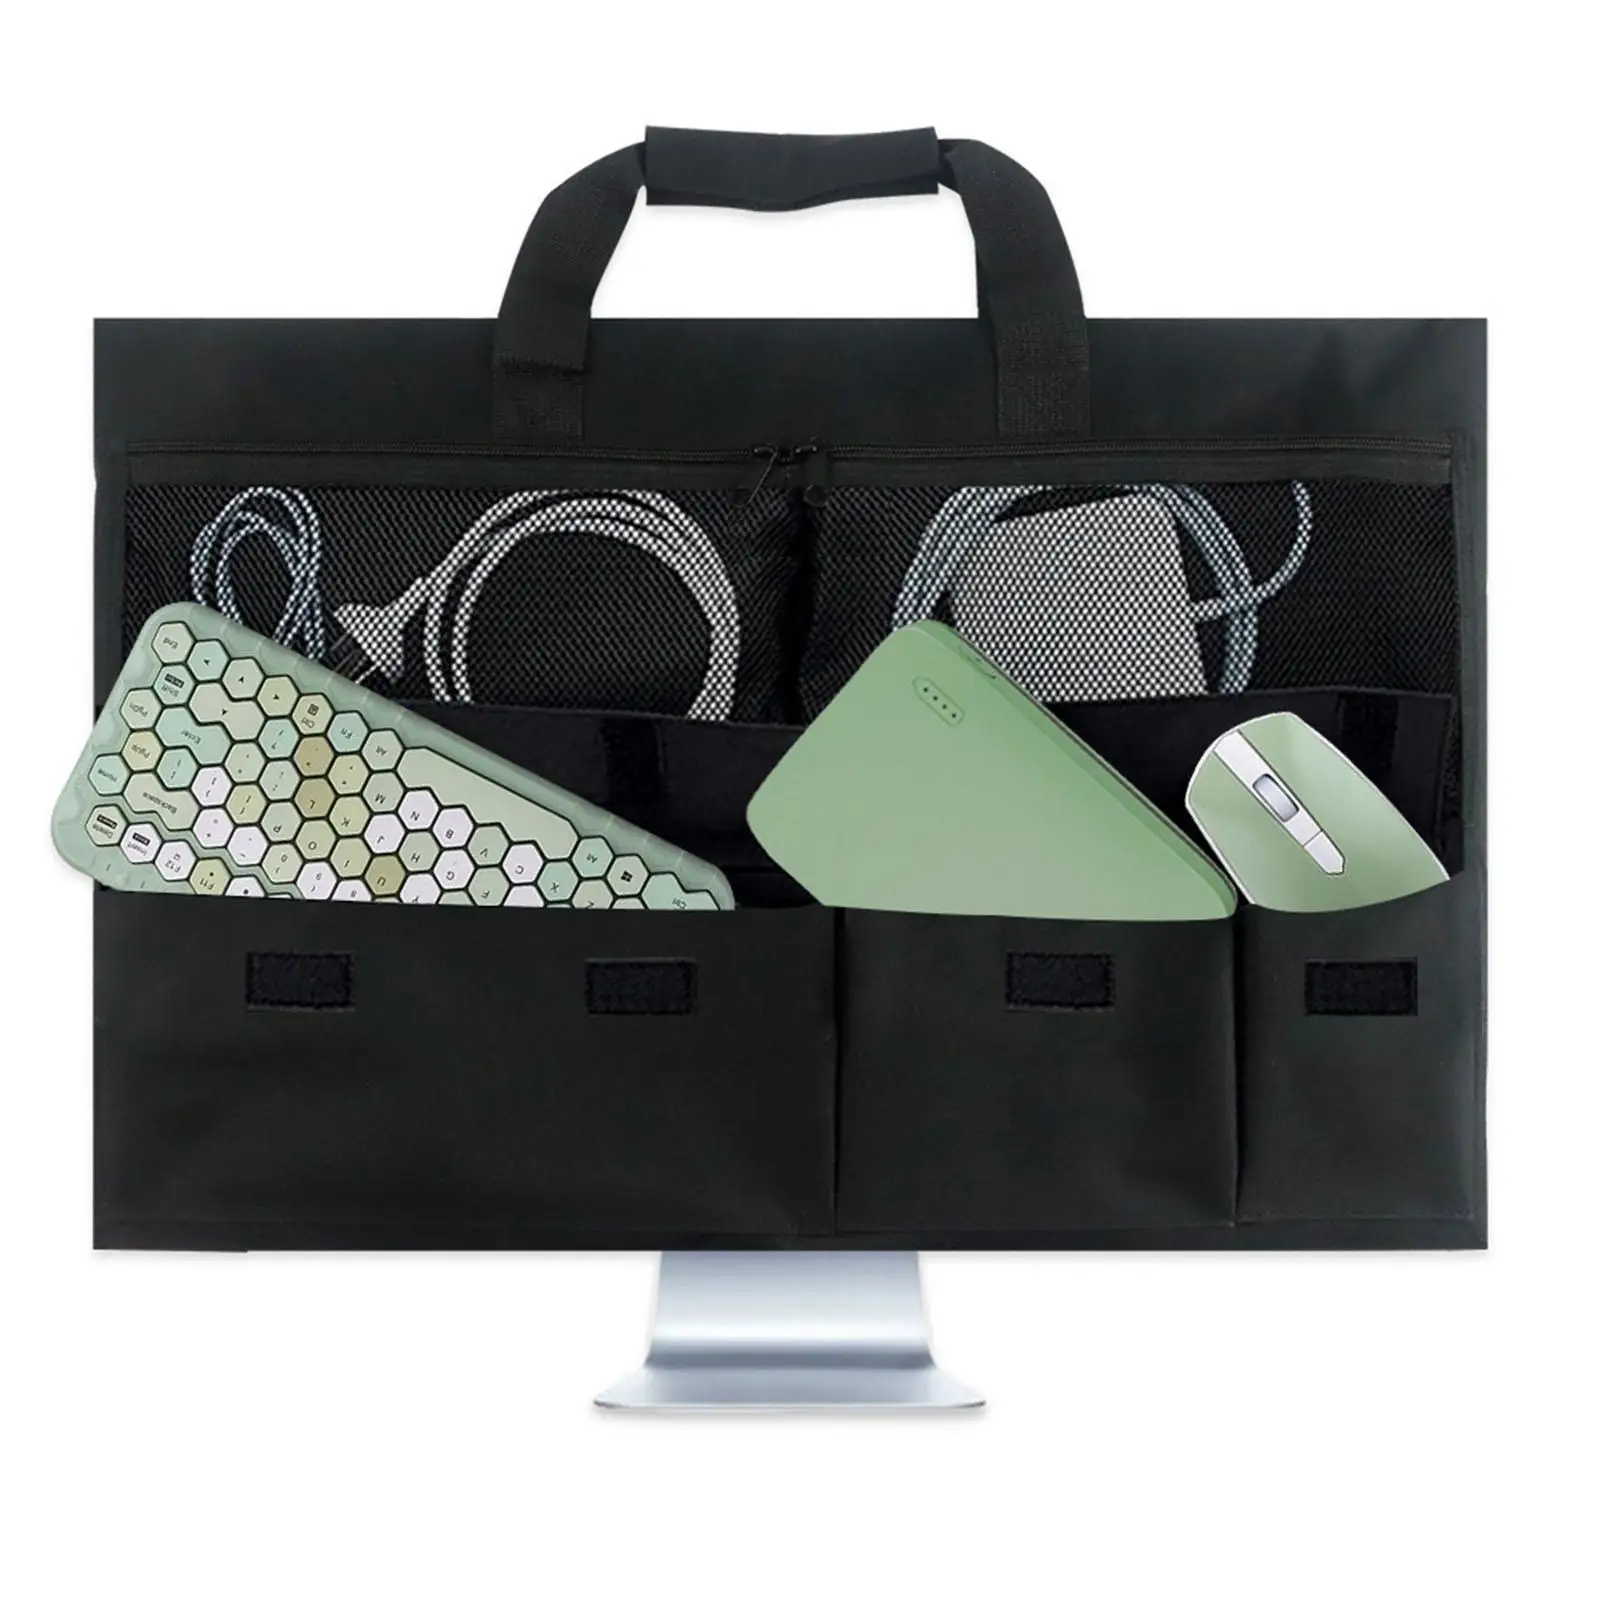 Travel Carrying Case 24 inch Screen Computer Monitor Protective for iMac Desktop